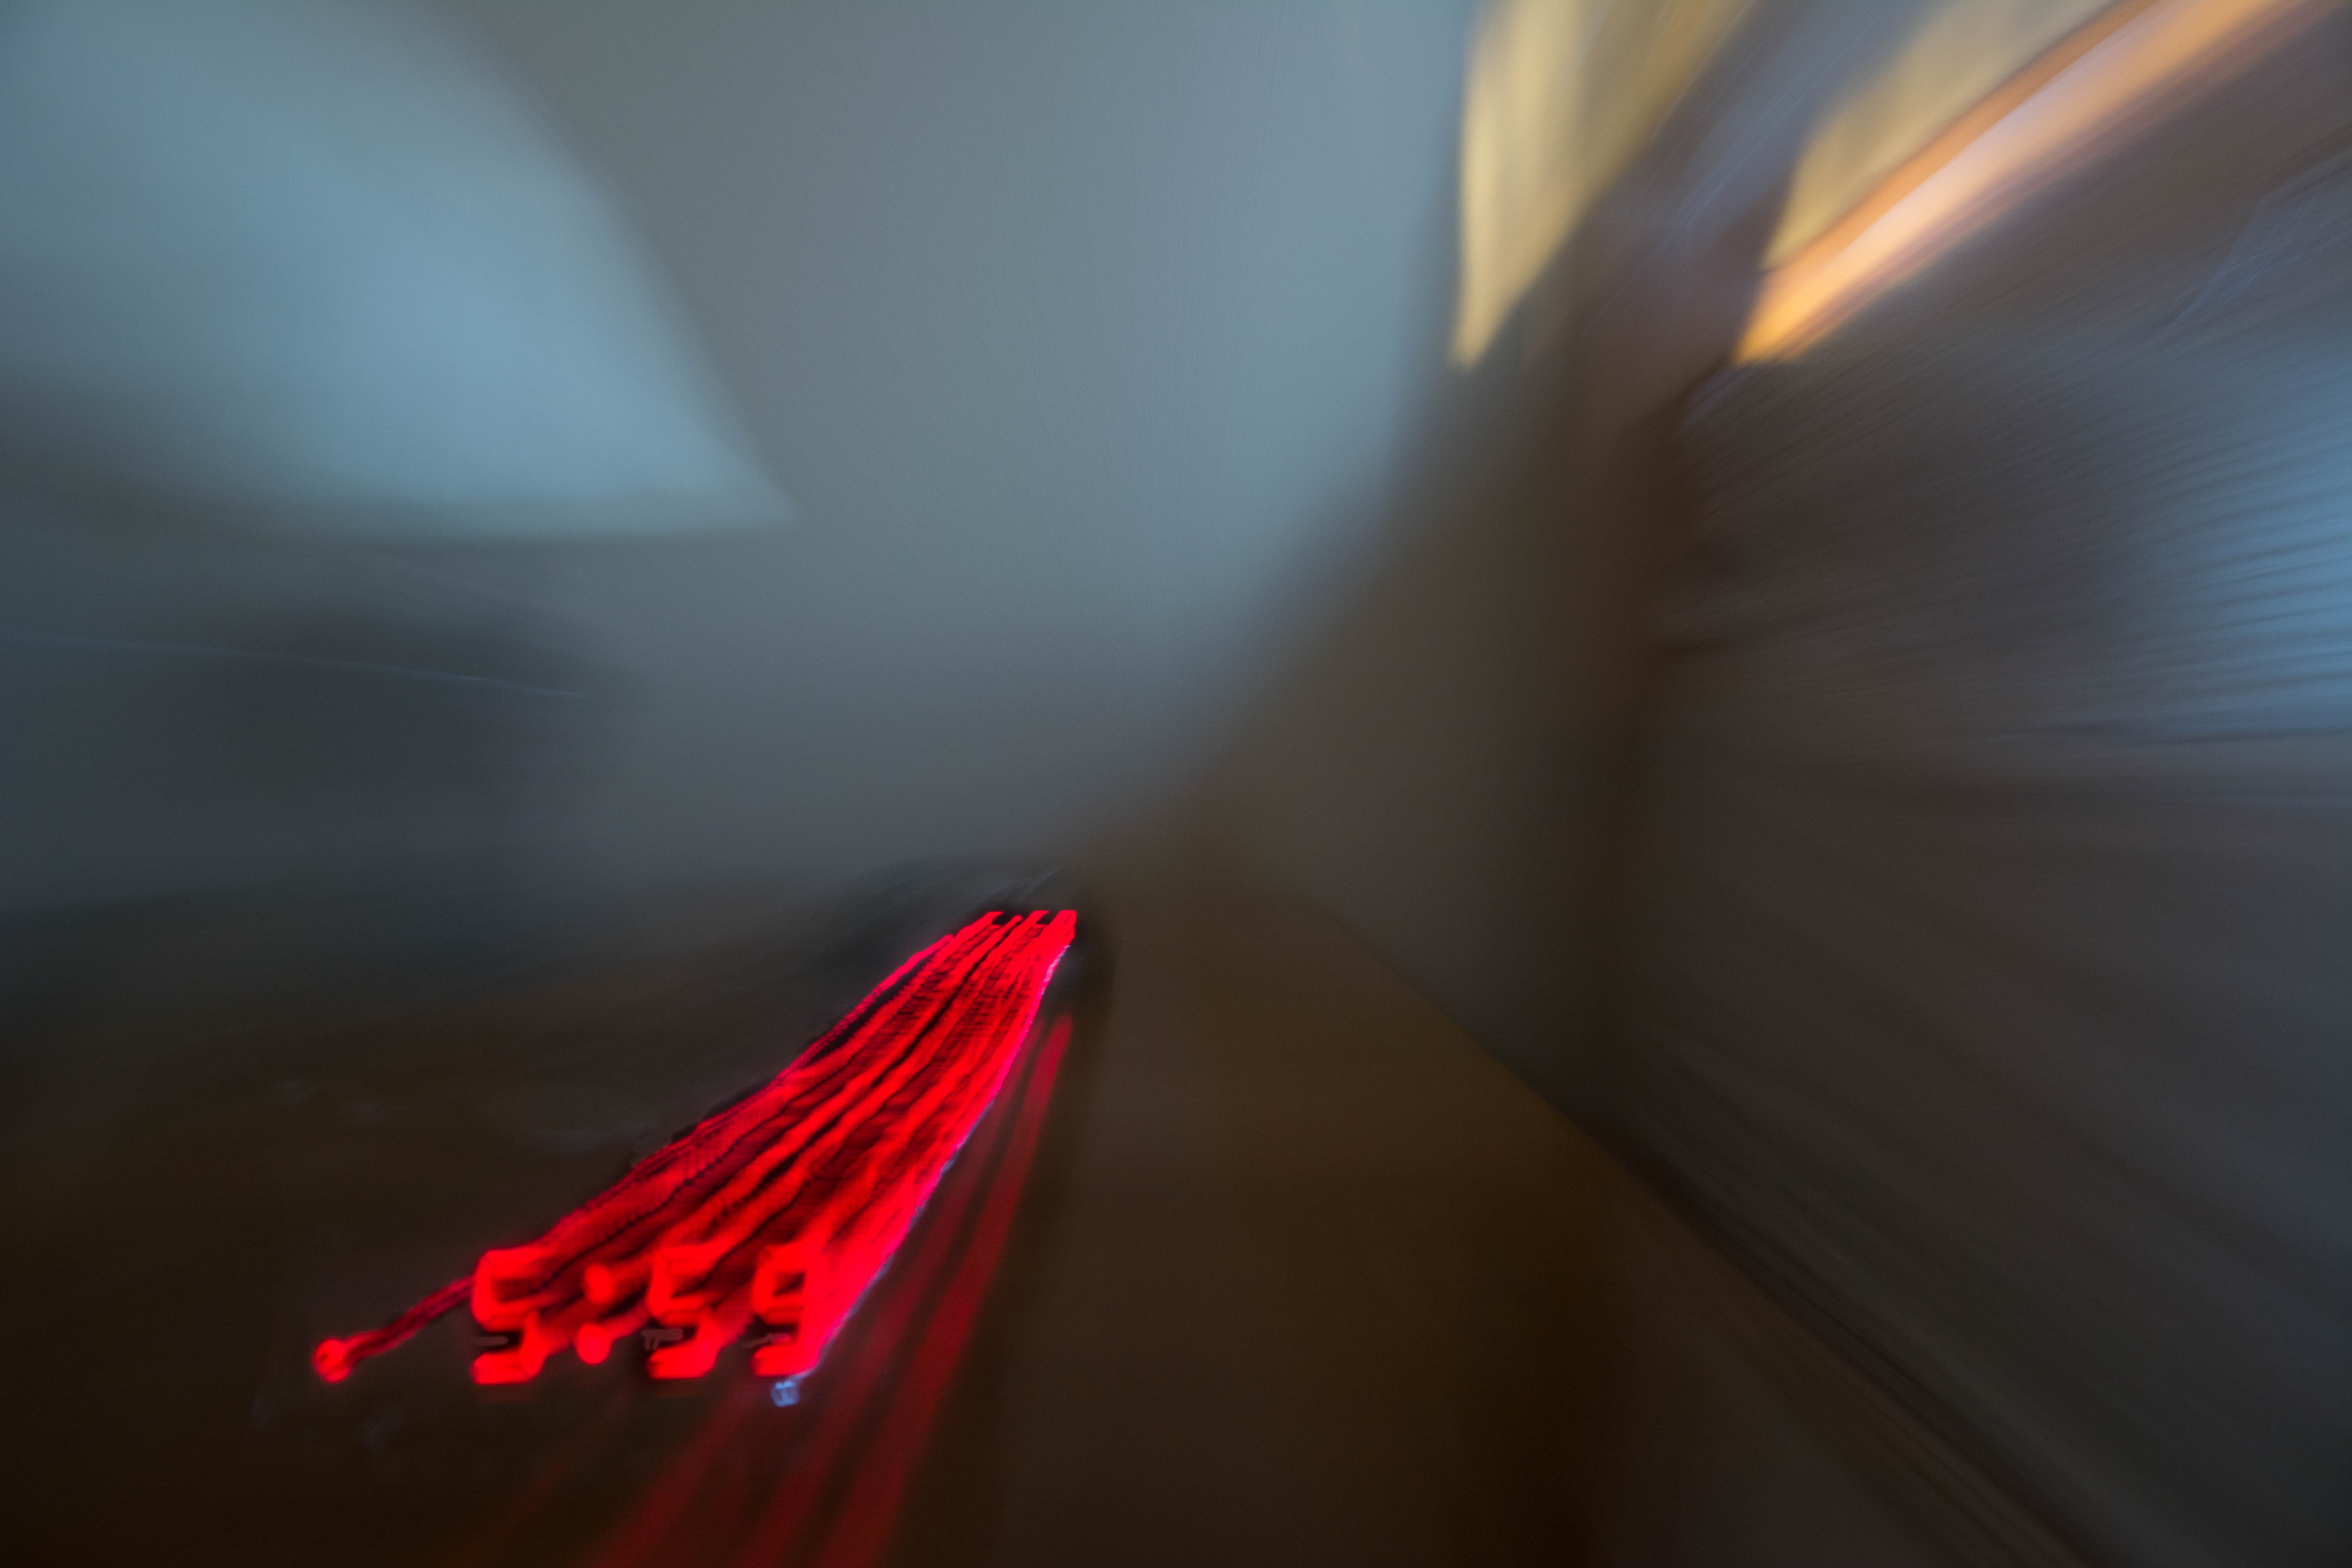 lines, abstract, red, miscellanea, miscellaneous, blur, smooth Image for desktop